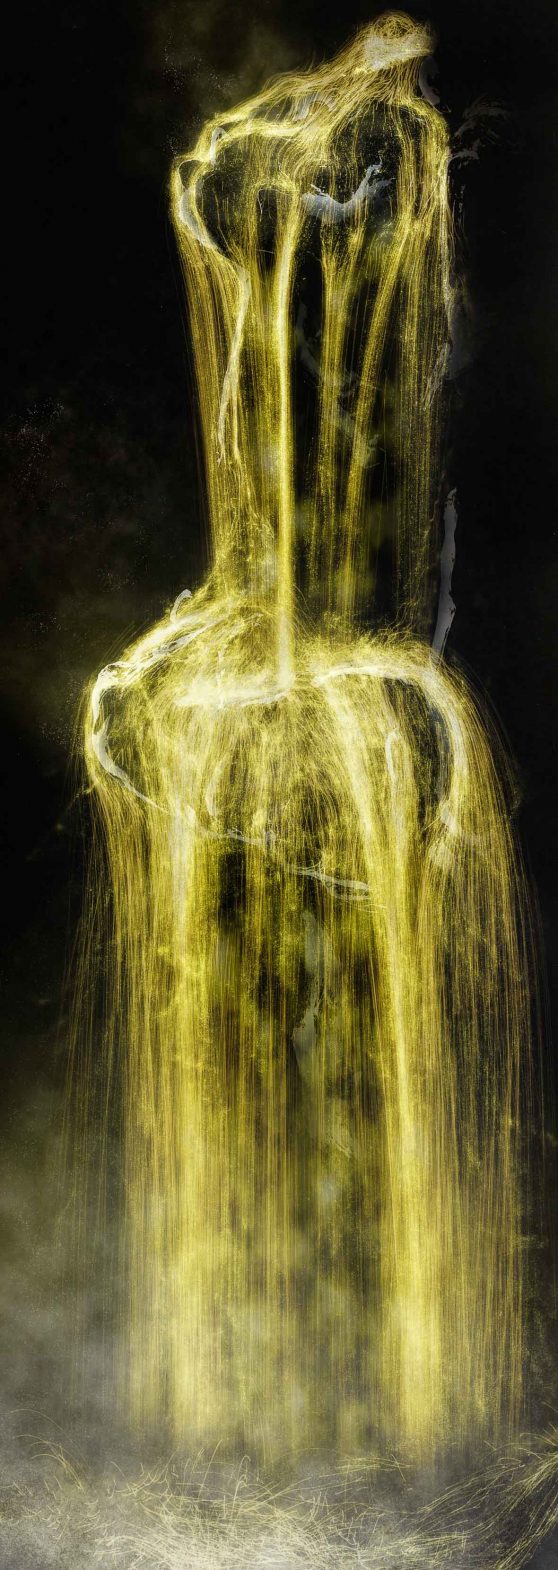 Universe of Water Particles – Gold teamLab, 2016, Digital Work, 5 channels, Continuous Loop.